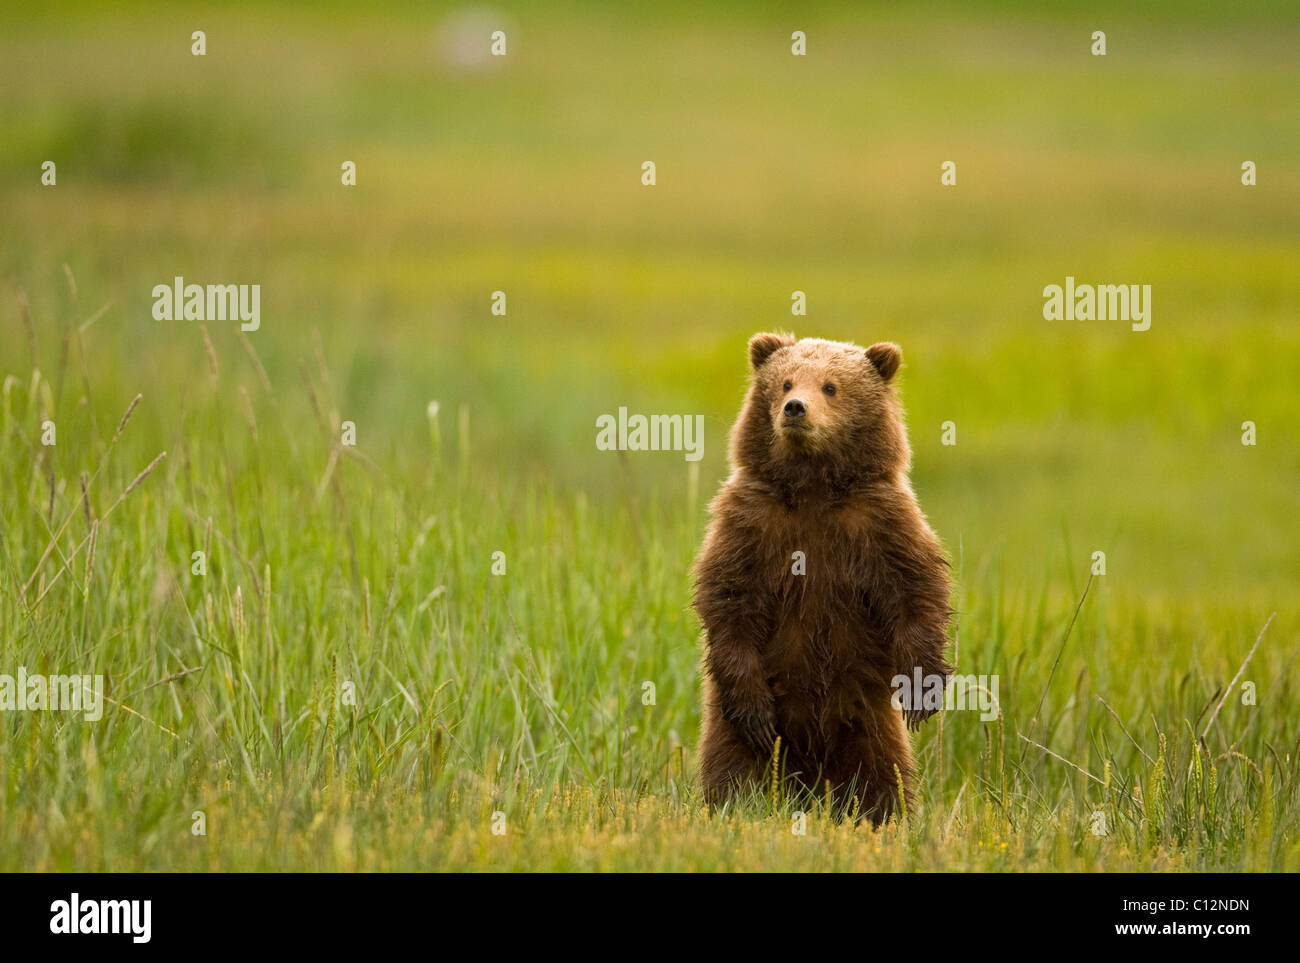 A young grizzly bear stands upright in a  coastal meadow. Stock Photo